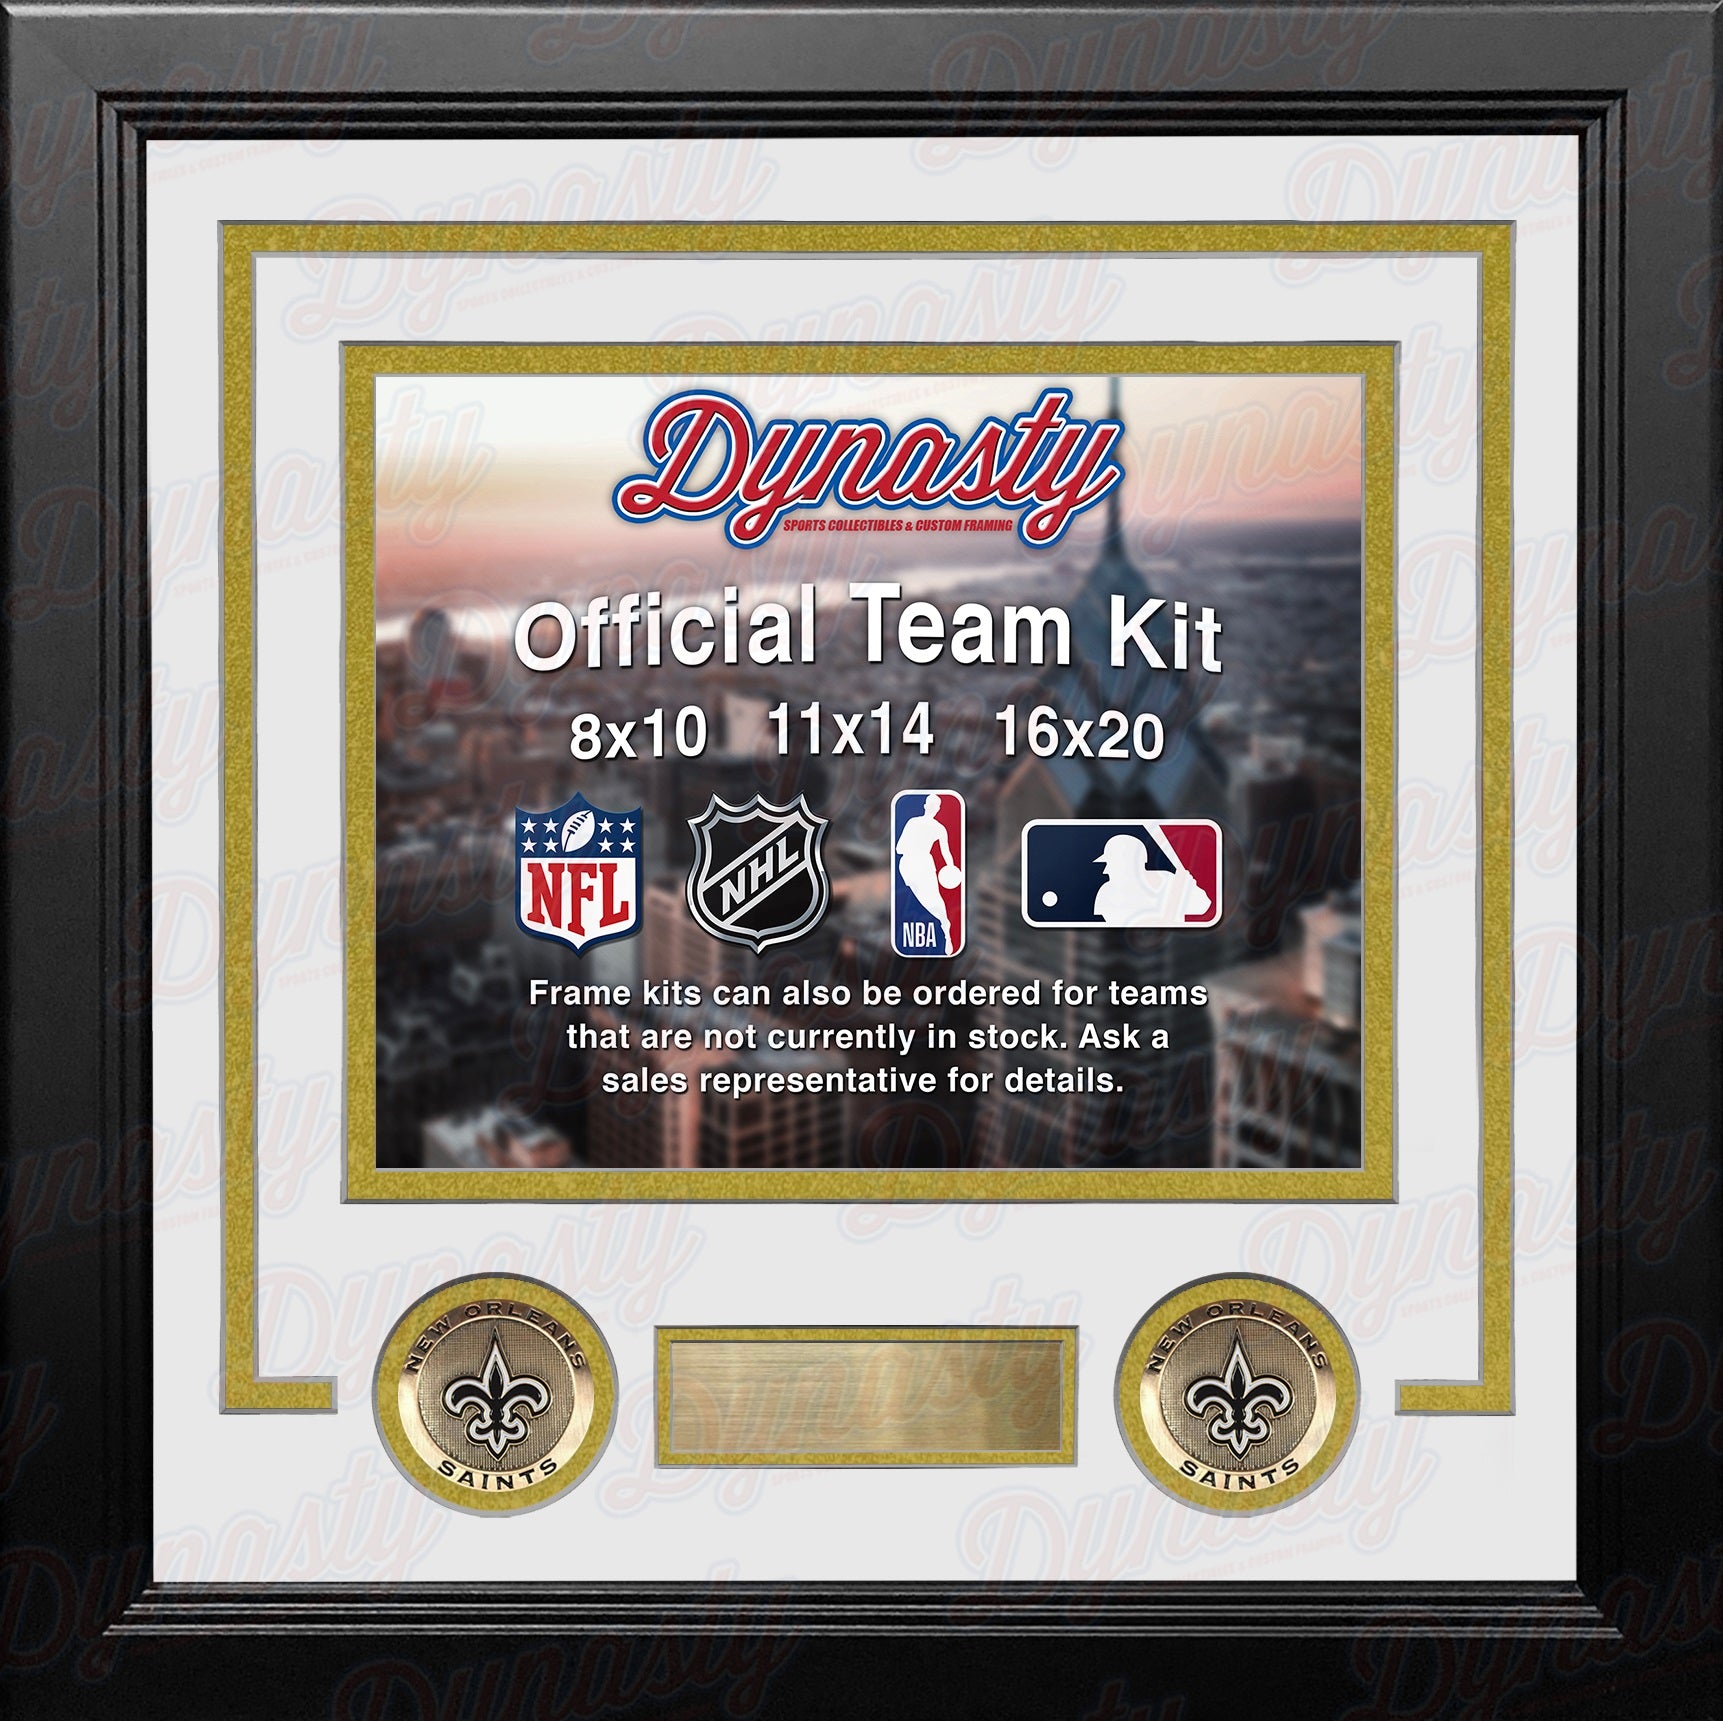 New Orleans Saints Custom NFL Football 16x20 Picture Frame Kit (Multiple Colors) - Dynasty Sports & Framing 